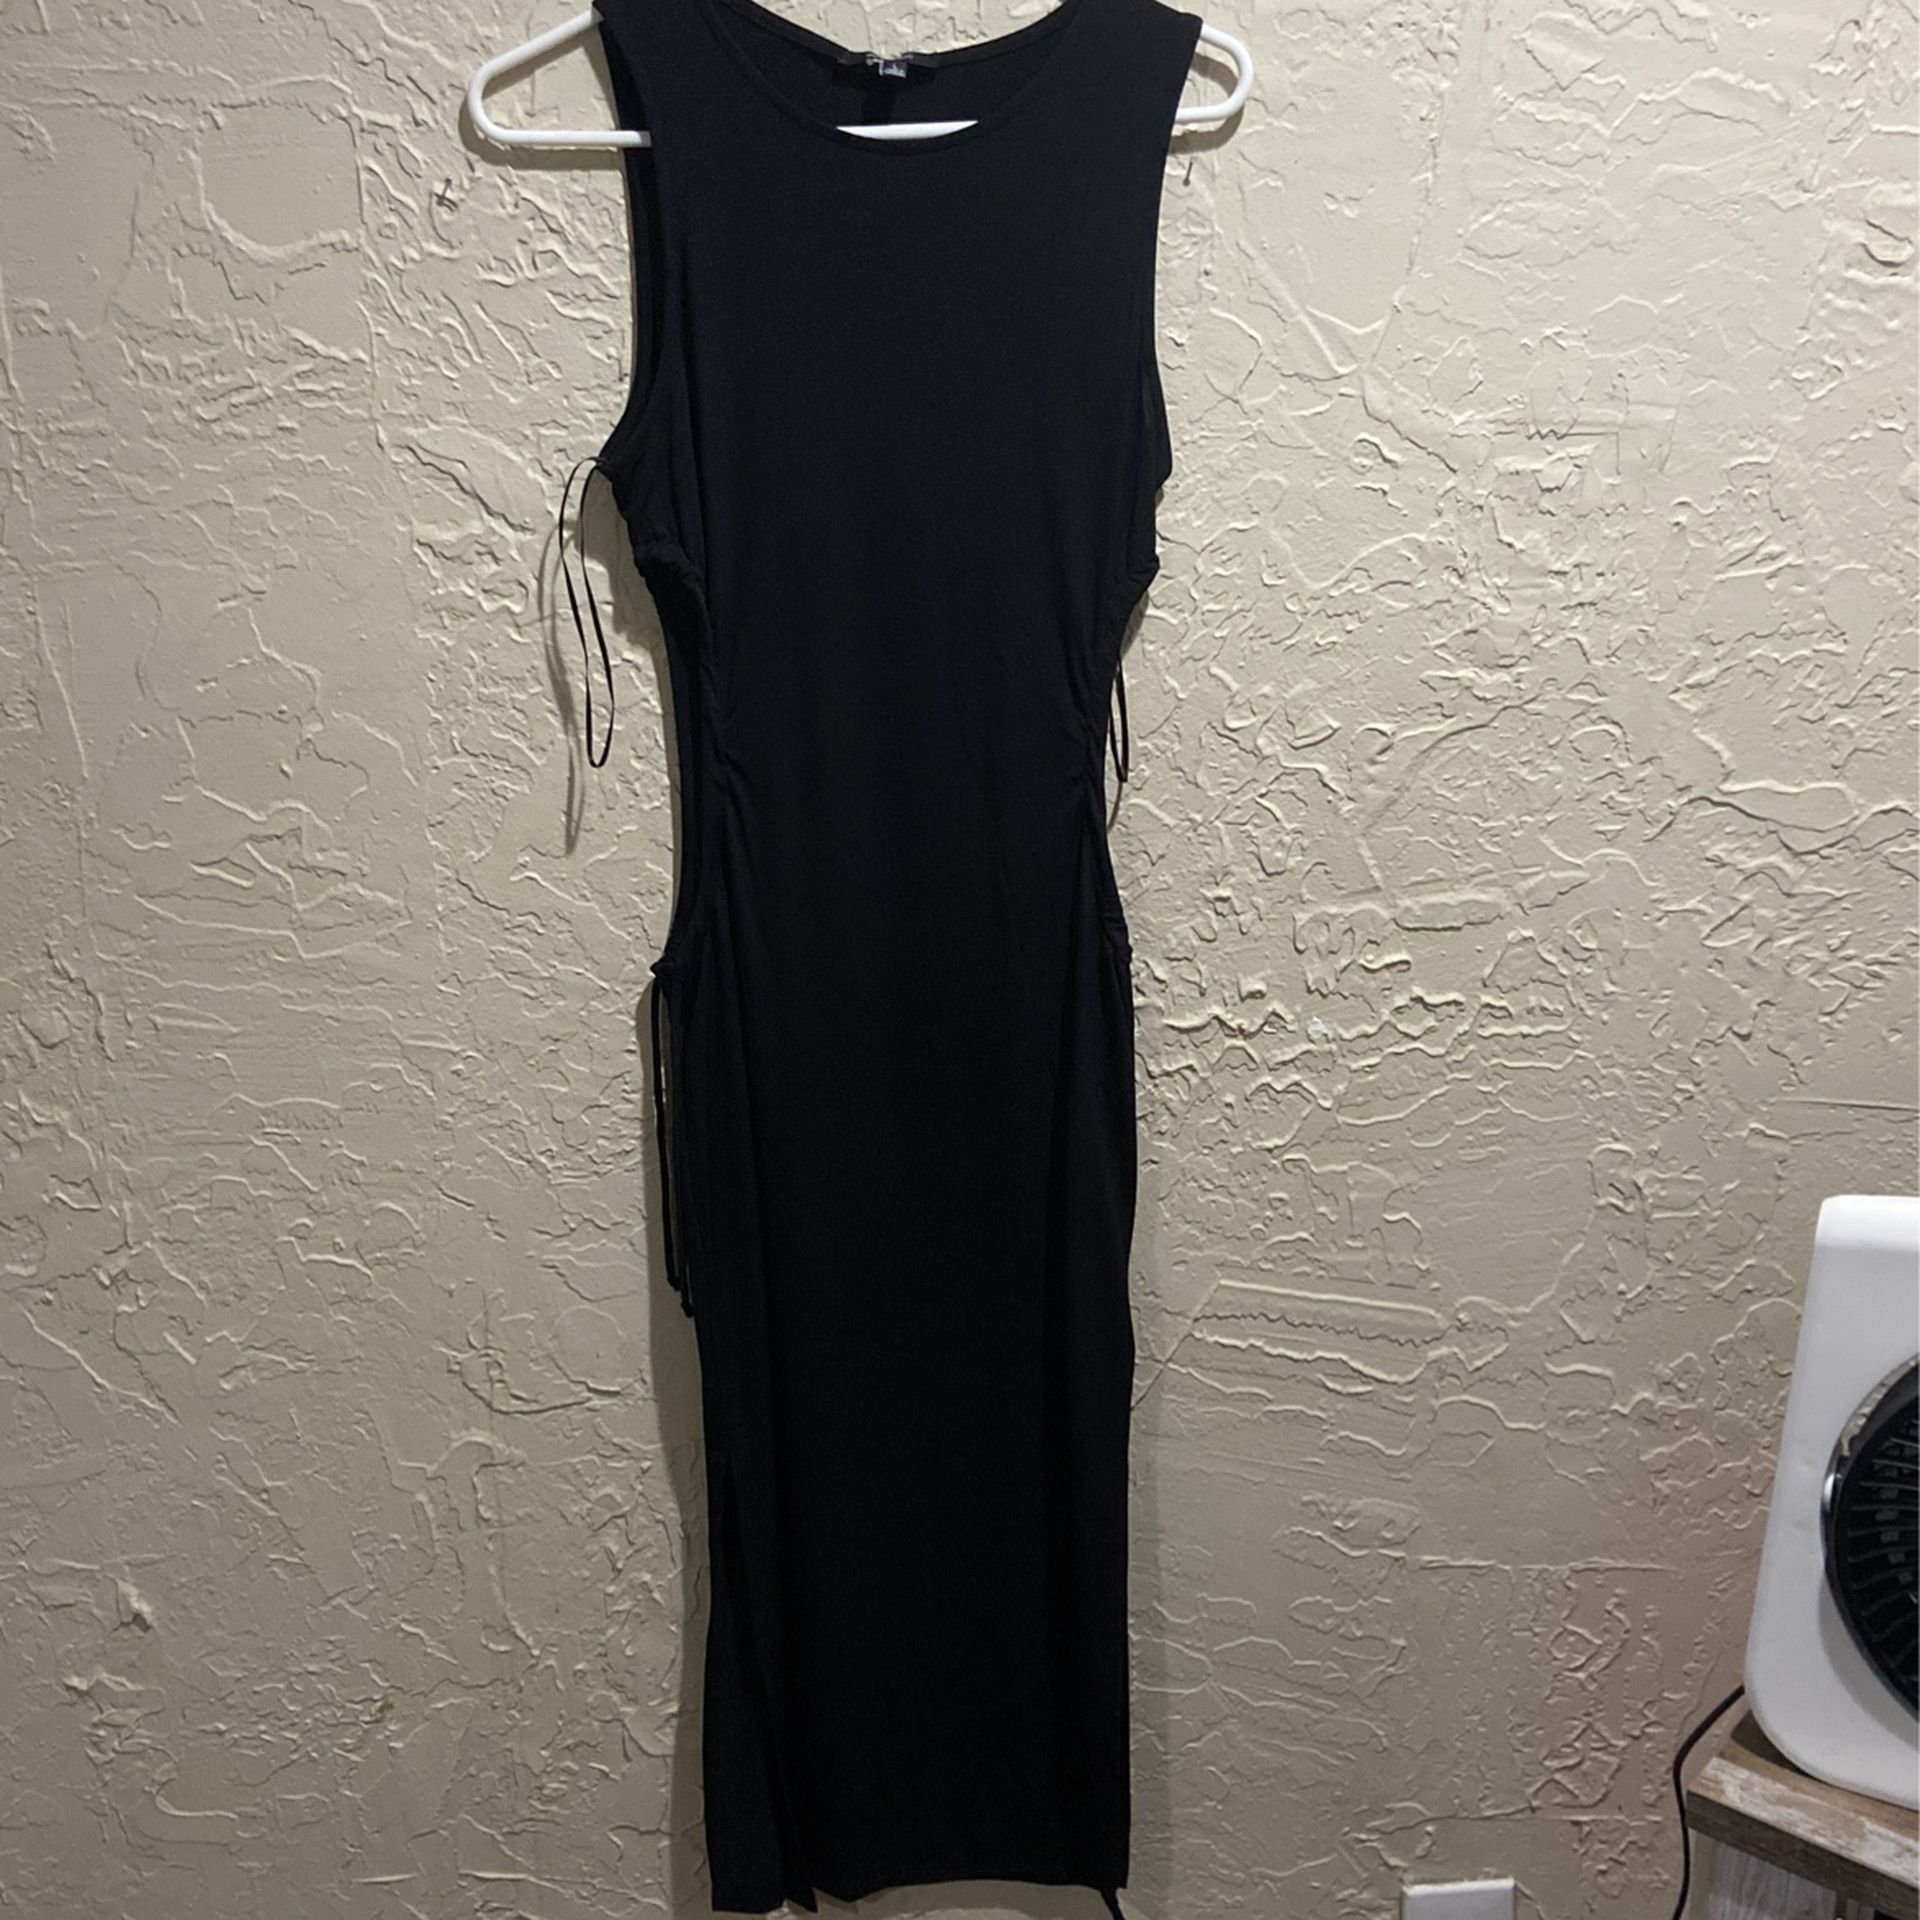 This Black Sideless Ambiance Dress Is In Perfect Condition